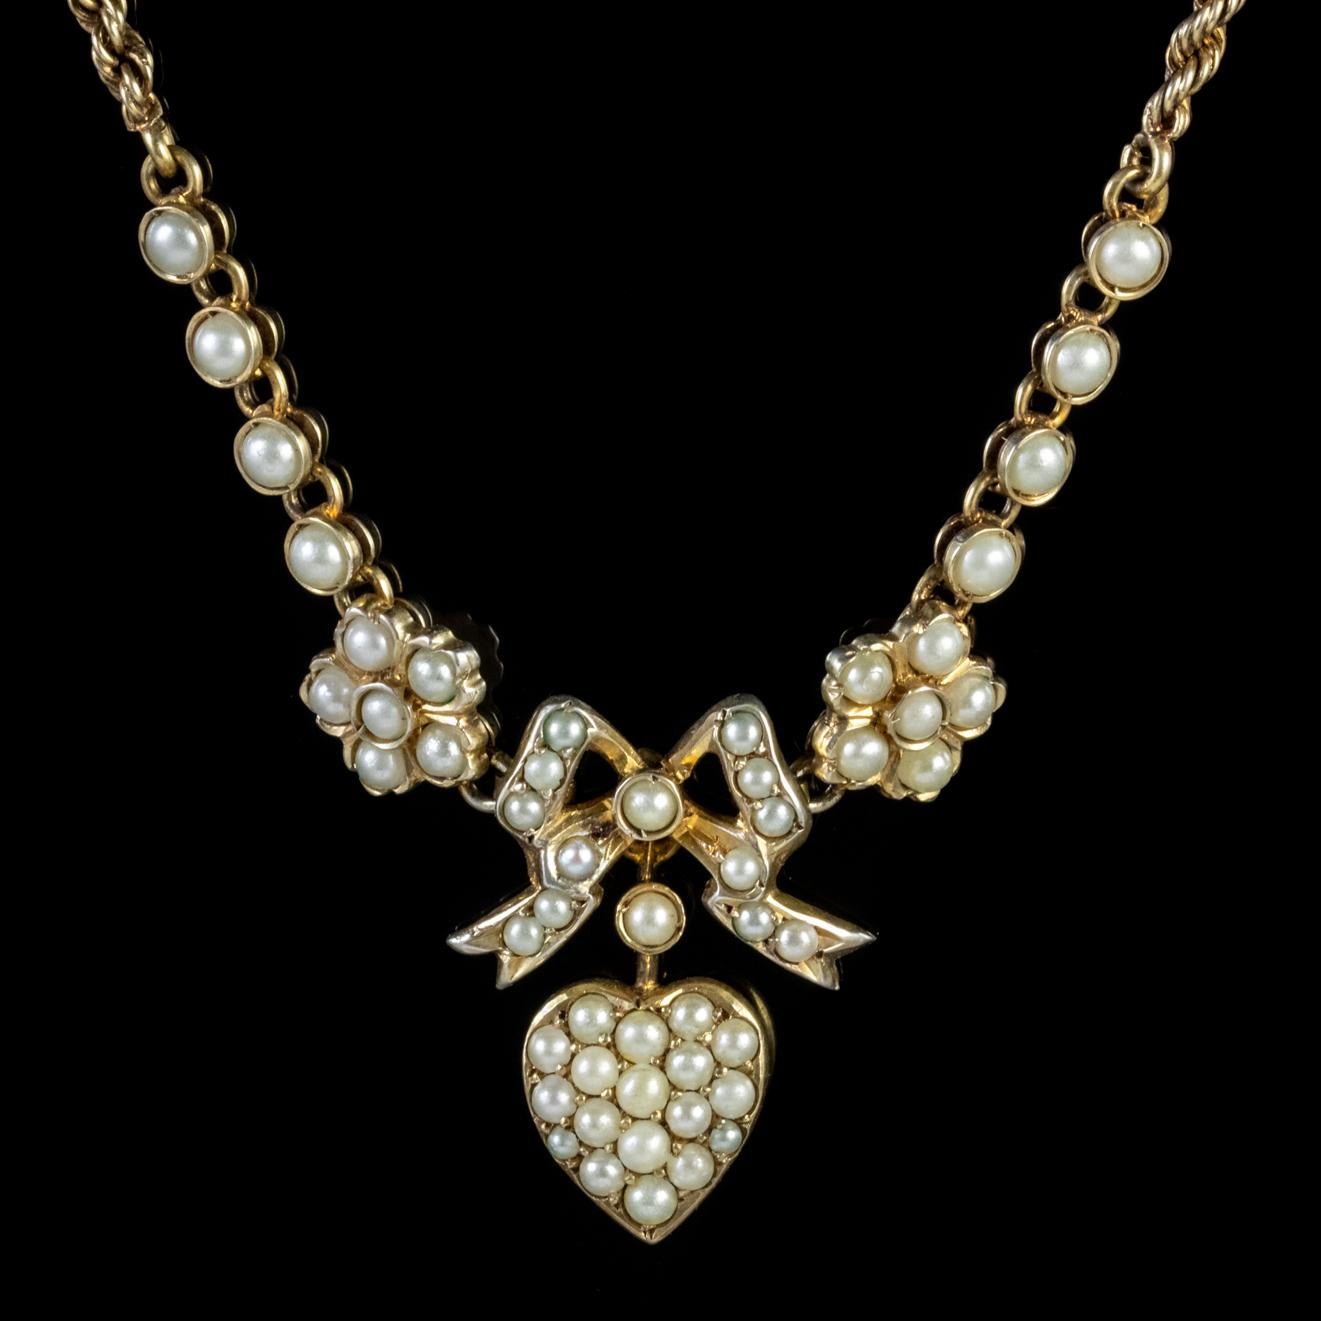 A sweet antique Edwardian lavaliere necklace featuring two large forget me nots with a bow and heart dropper hanging in the centre all decorated with lovely Pearls. 

Pearls are a true gift from Mother Nature and symbolize purity innocence and